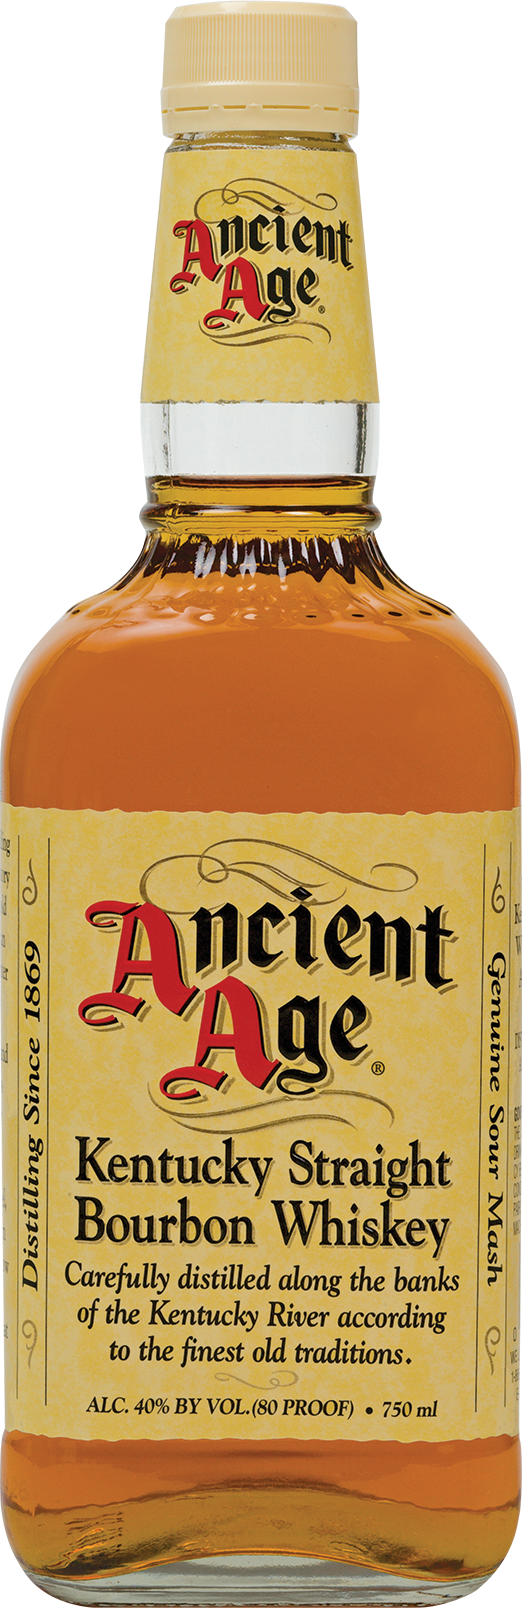 Ancient Age bottle image front with transparent background